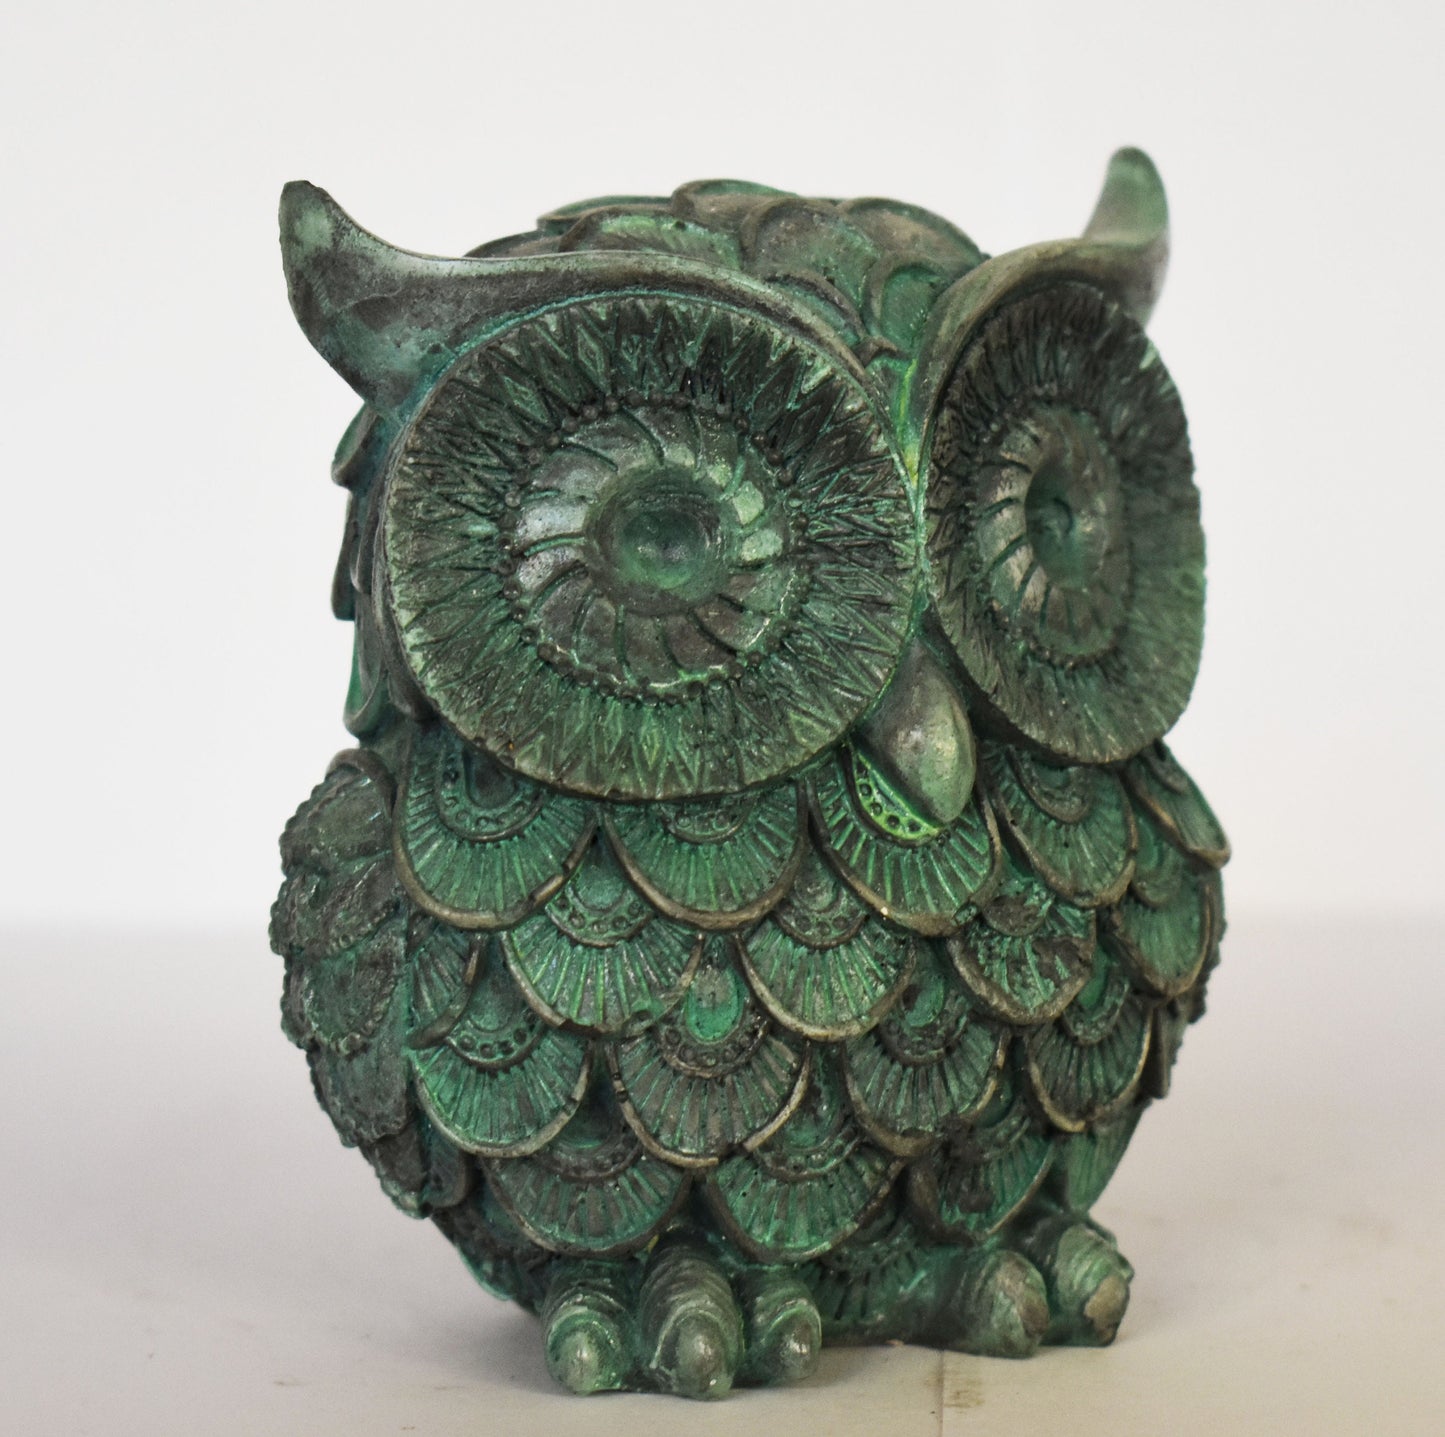 Owl of Goddess Athena - represent the literal wisdom and knowledge of Athena in her role as a goddess of wisdom - Casting Stone Statue